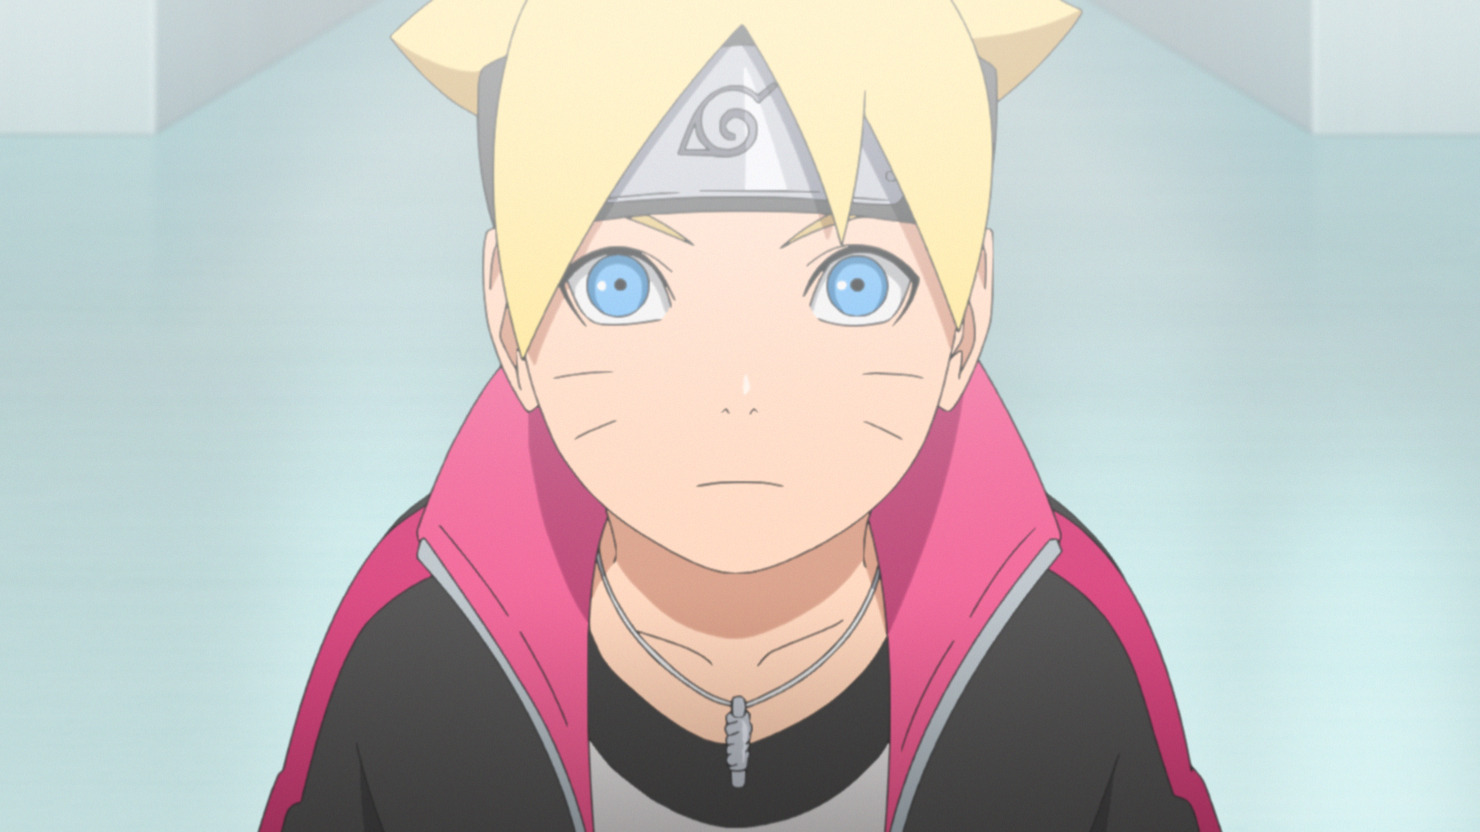 Crunchyroll - FEATURE: BORUTO is a Successful Return to the Small-Stakes  Thrills of Early Naruto